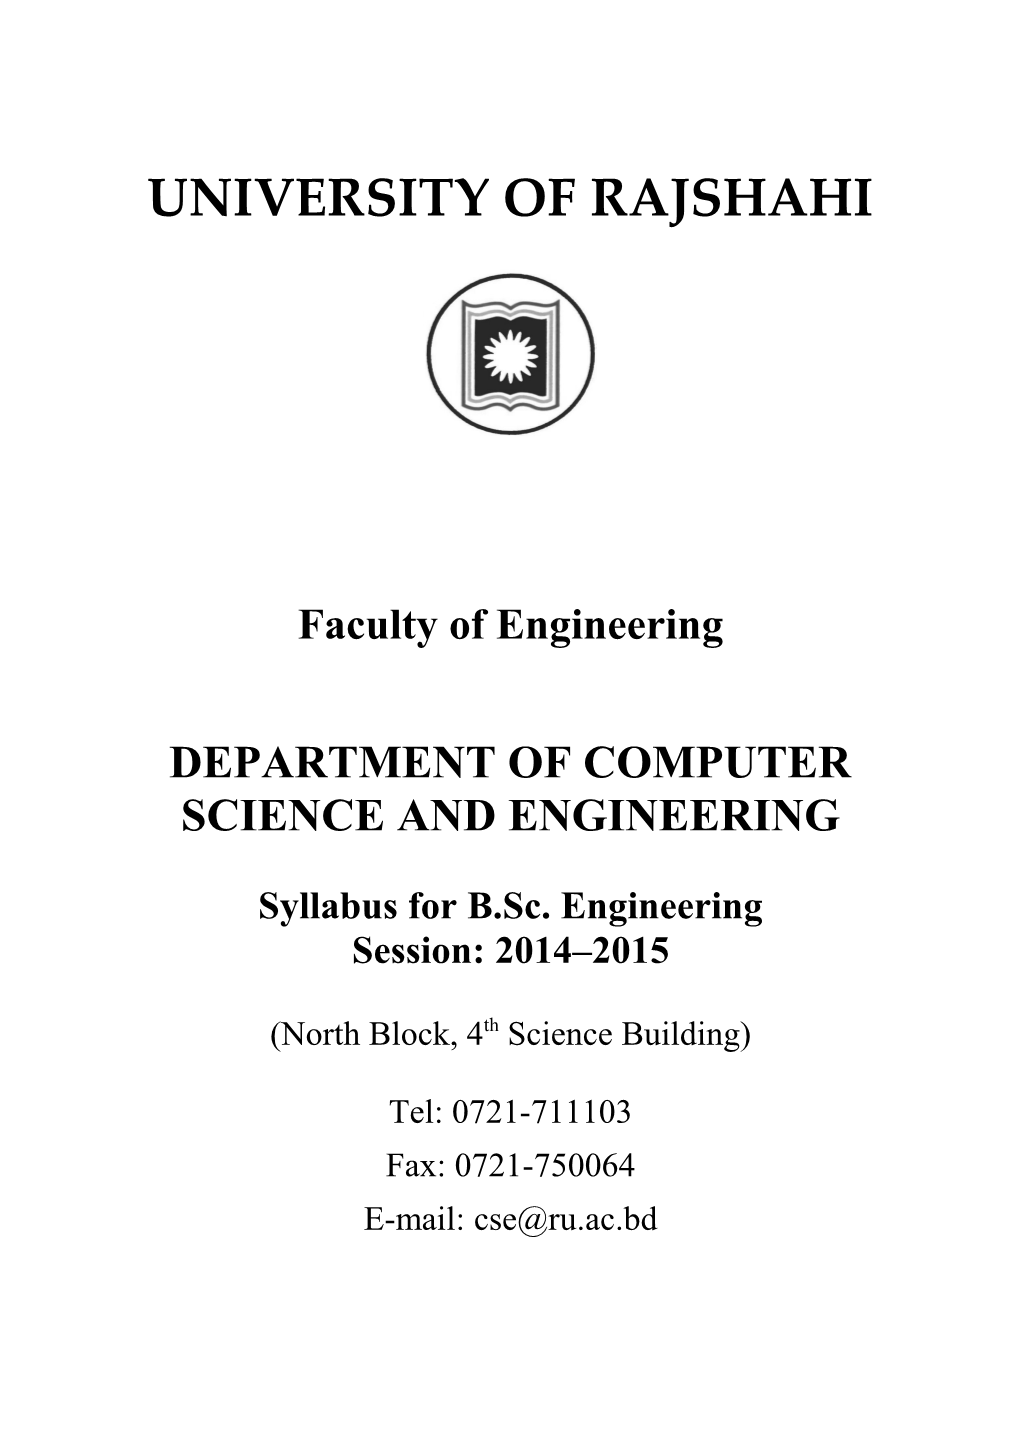 Department of Computer Science and Engineering